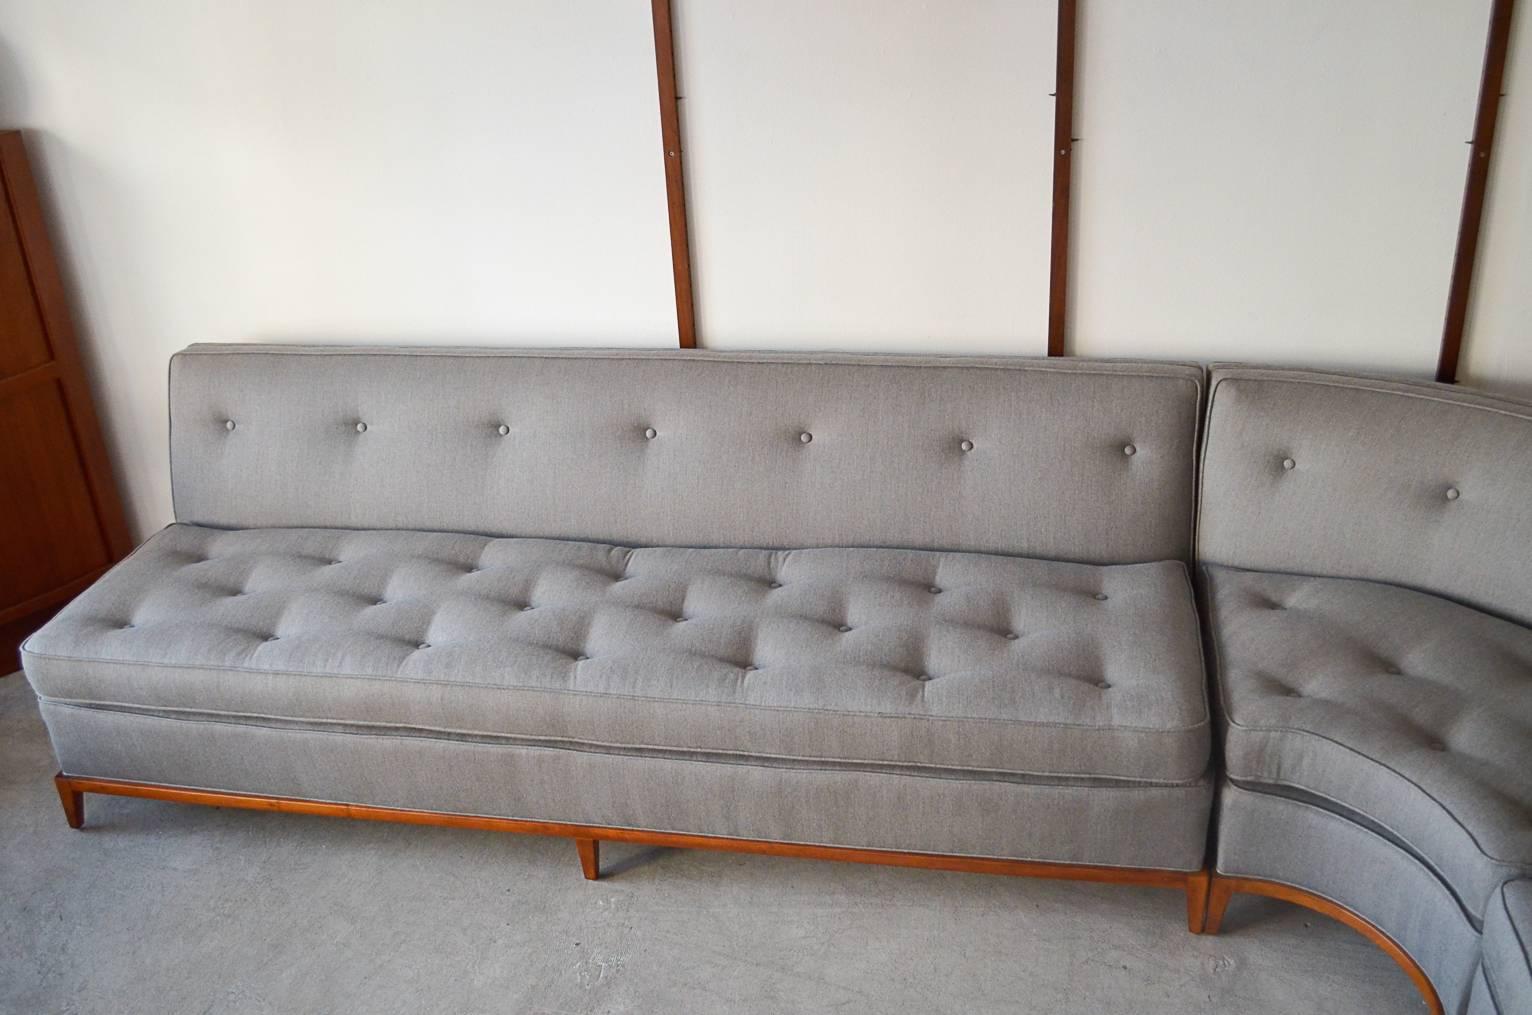 Three-piece sectional sofa by T.H. Robsjohn-Gibbings for Widdicomb. Walnut base with newly recovered double sided cushions with clips to prevent cushions from traveling.

Lovely updated grey herringbone tweed fabric with tufted backrest and double